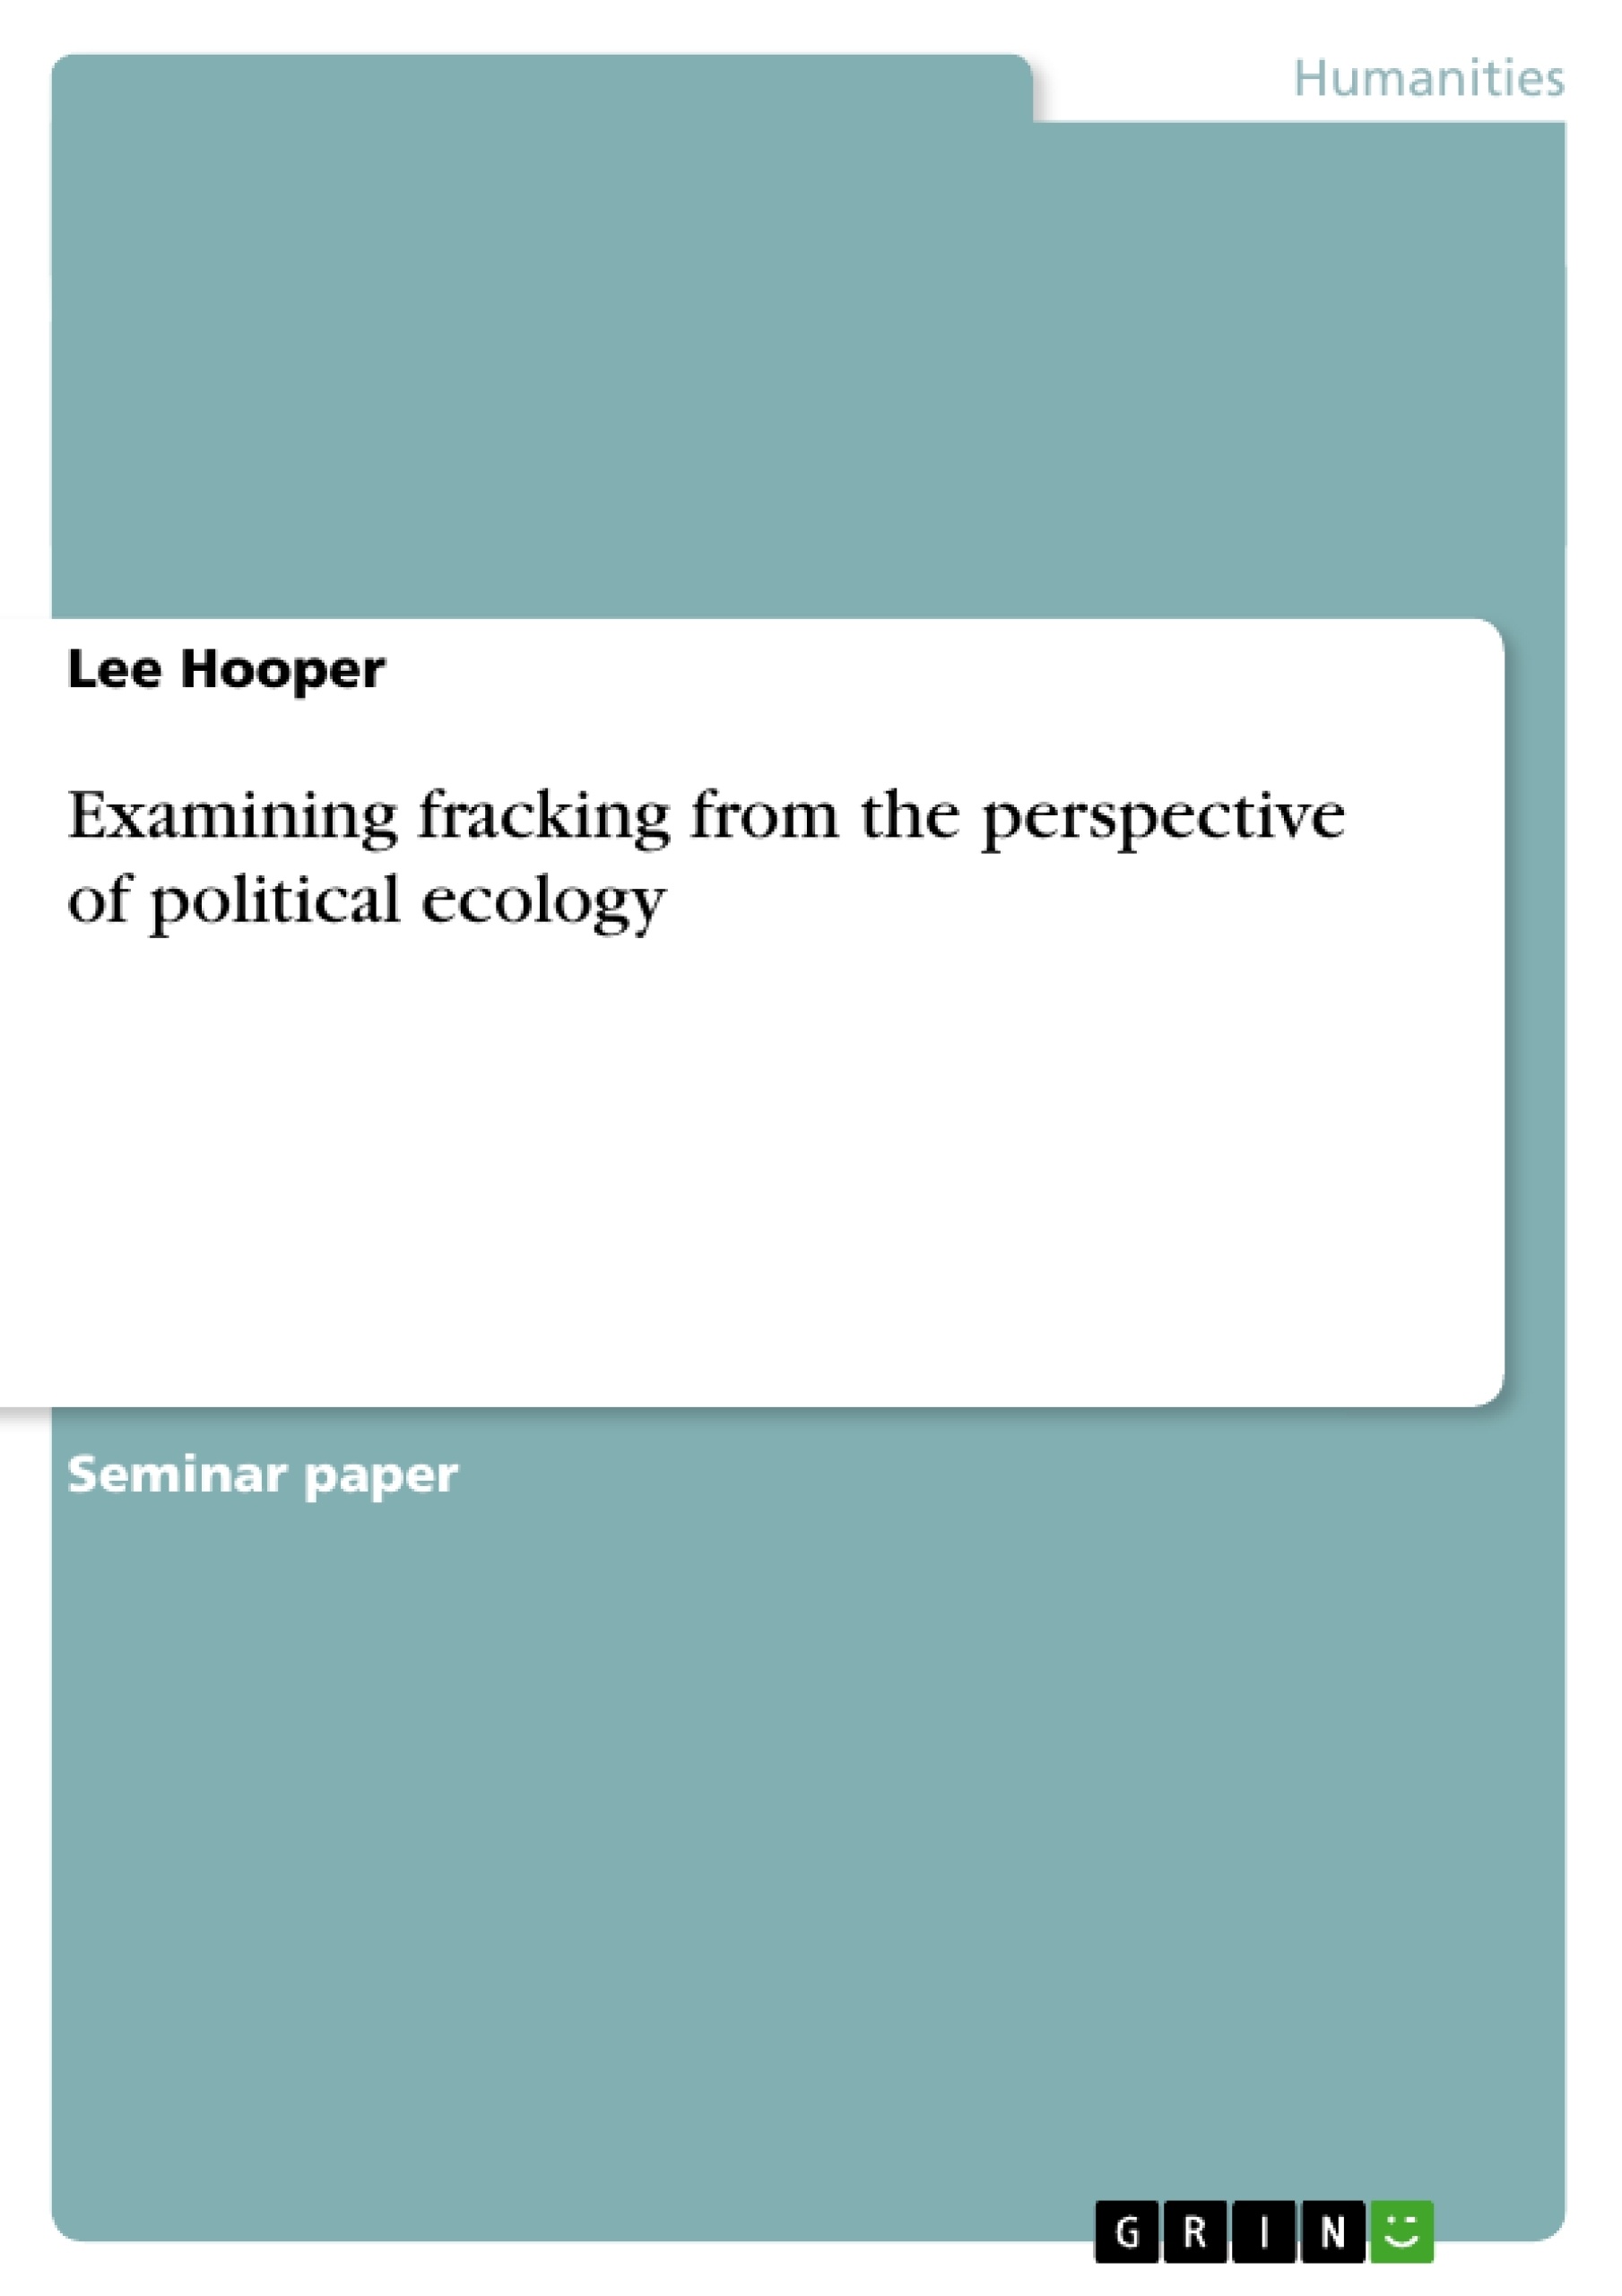 Título: Examining fracking from the perspective of political ecology